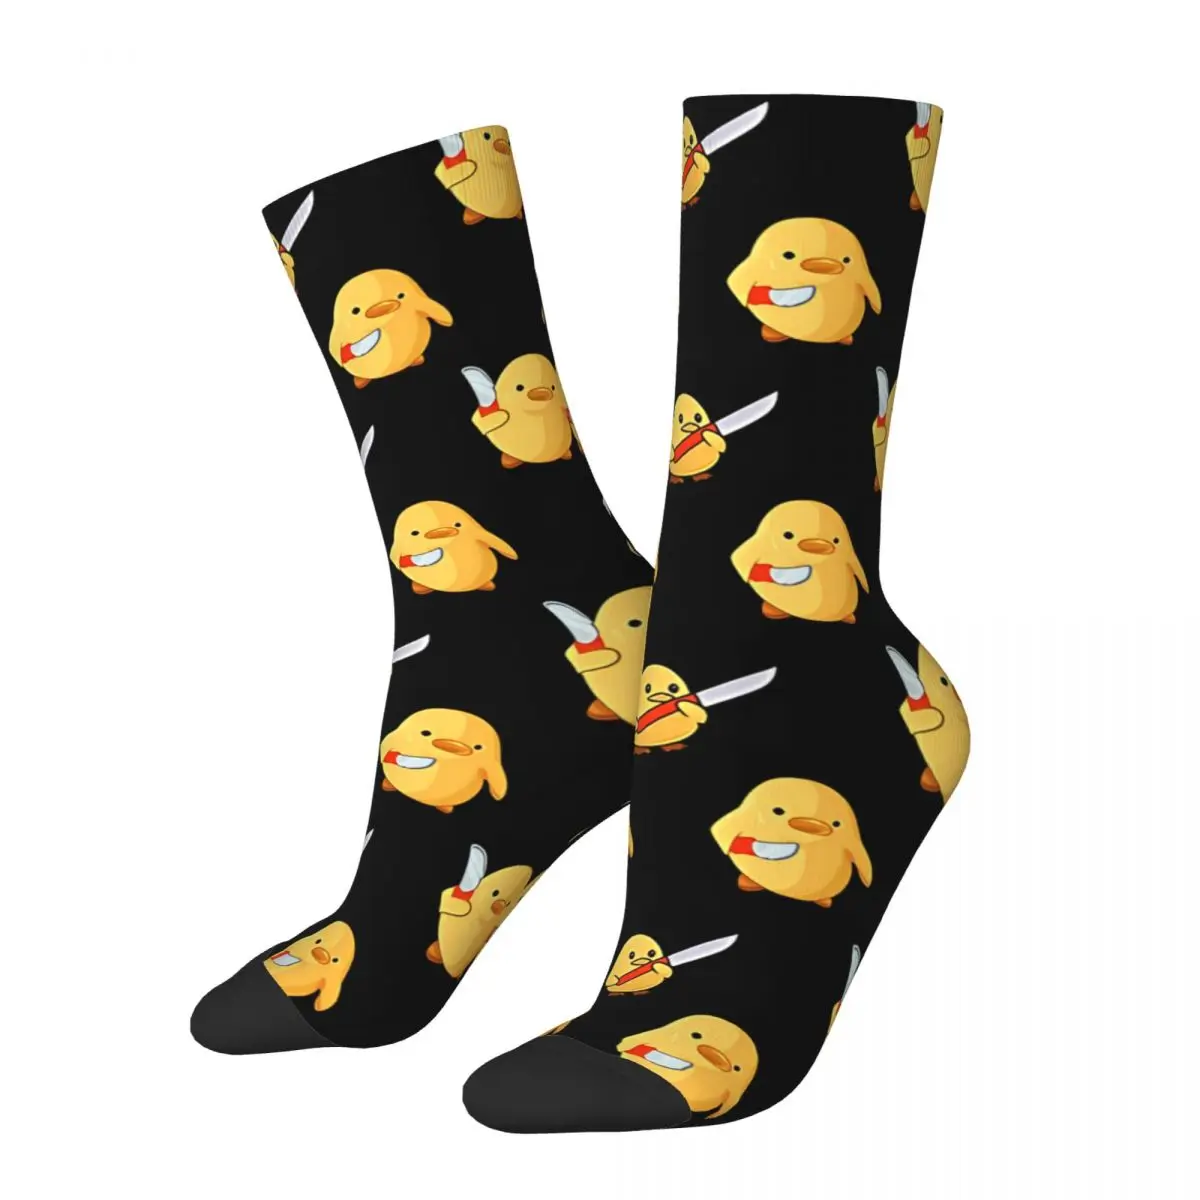 Happy Men's Socks Duck With Knife Retro Harajuku Street Style Casual Pattern Crew Crazy Sock Gift Printed